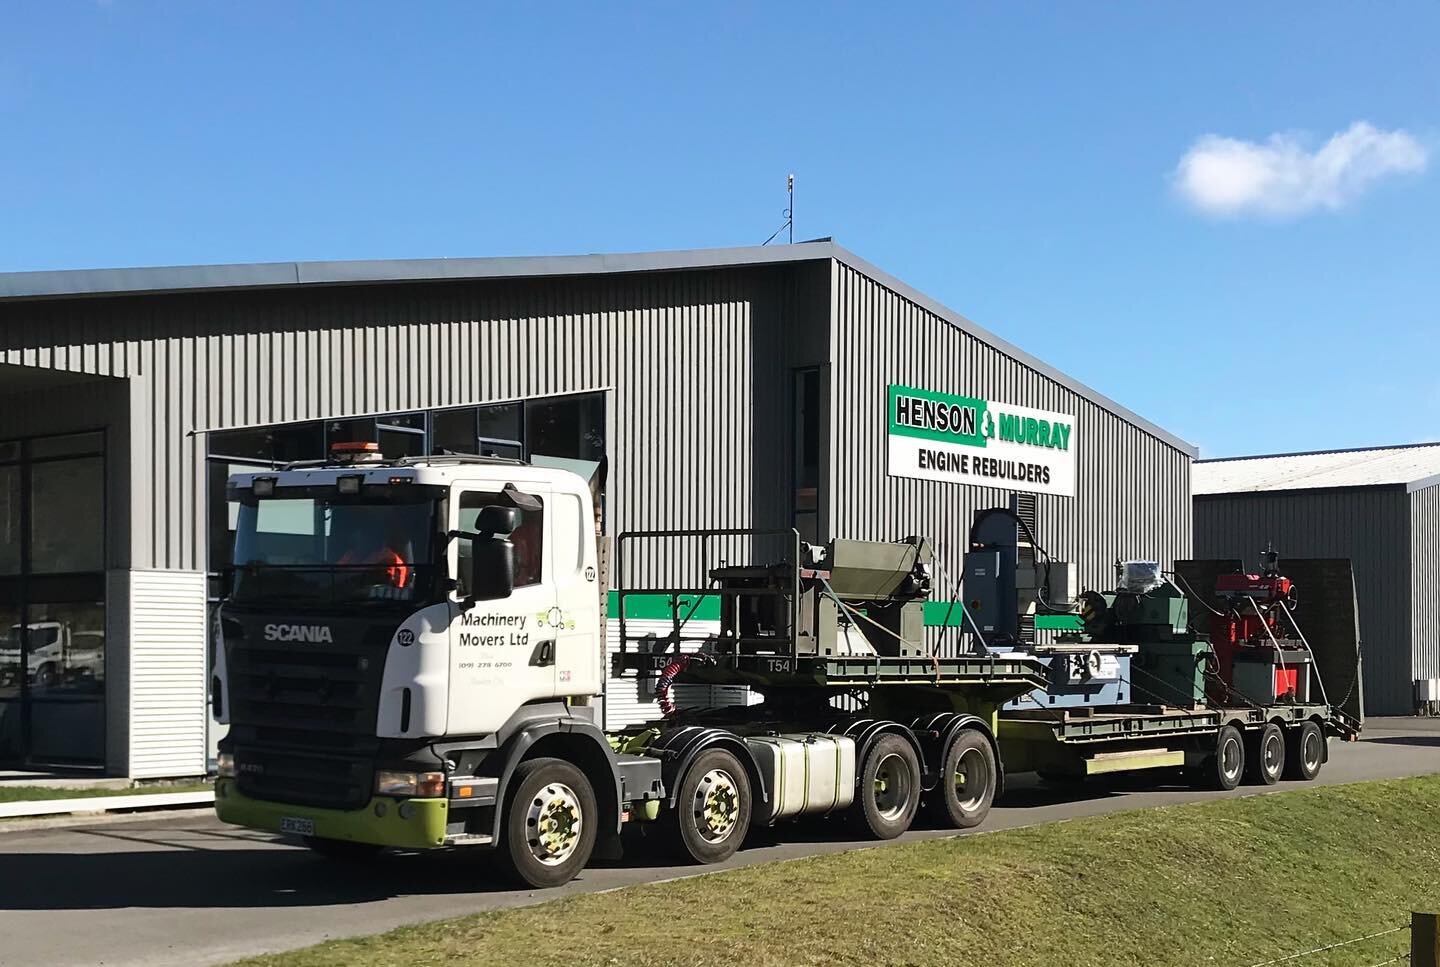 We are pleased to announce our new building at Bruce McLaren Motorsport Park is complete and we are in the process of relocating Henson &amp; Murray Engine Rebuilders. 

We have successfully moved all of our machinery and tooling, and are now in the 